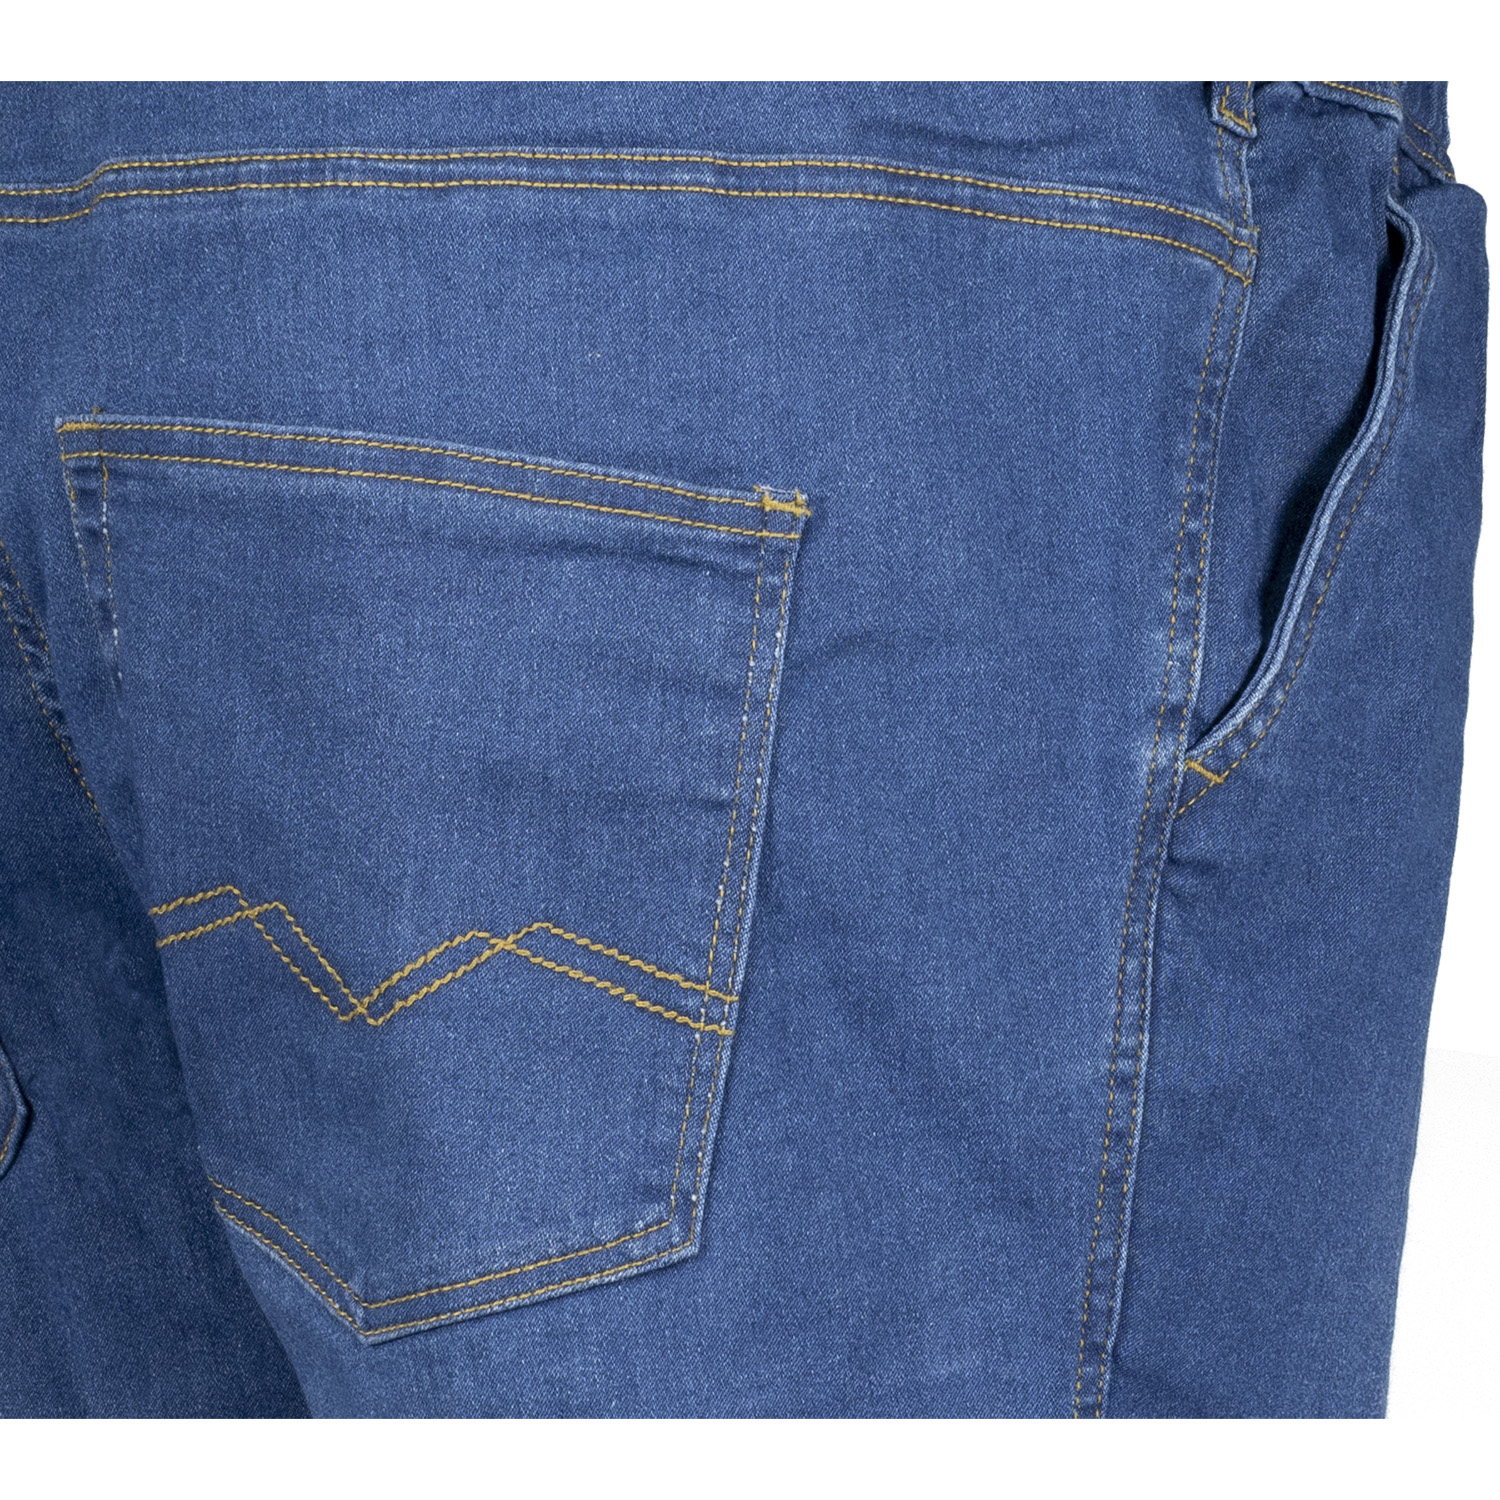 Jeans sweatpants long in medium blue for men by Adamo series "Texas" in oversizes up to 12XL